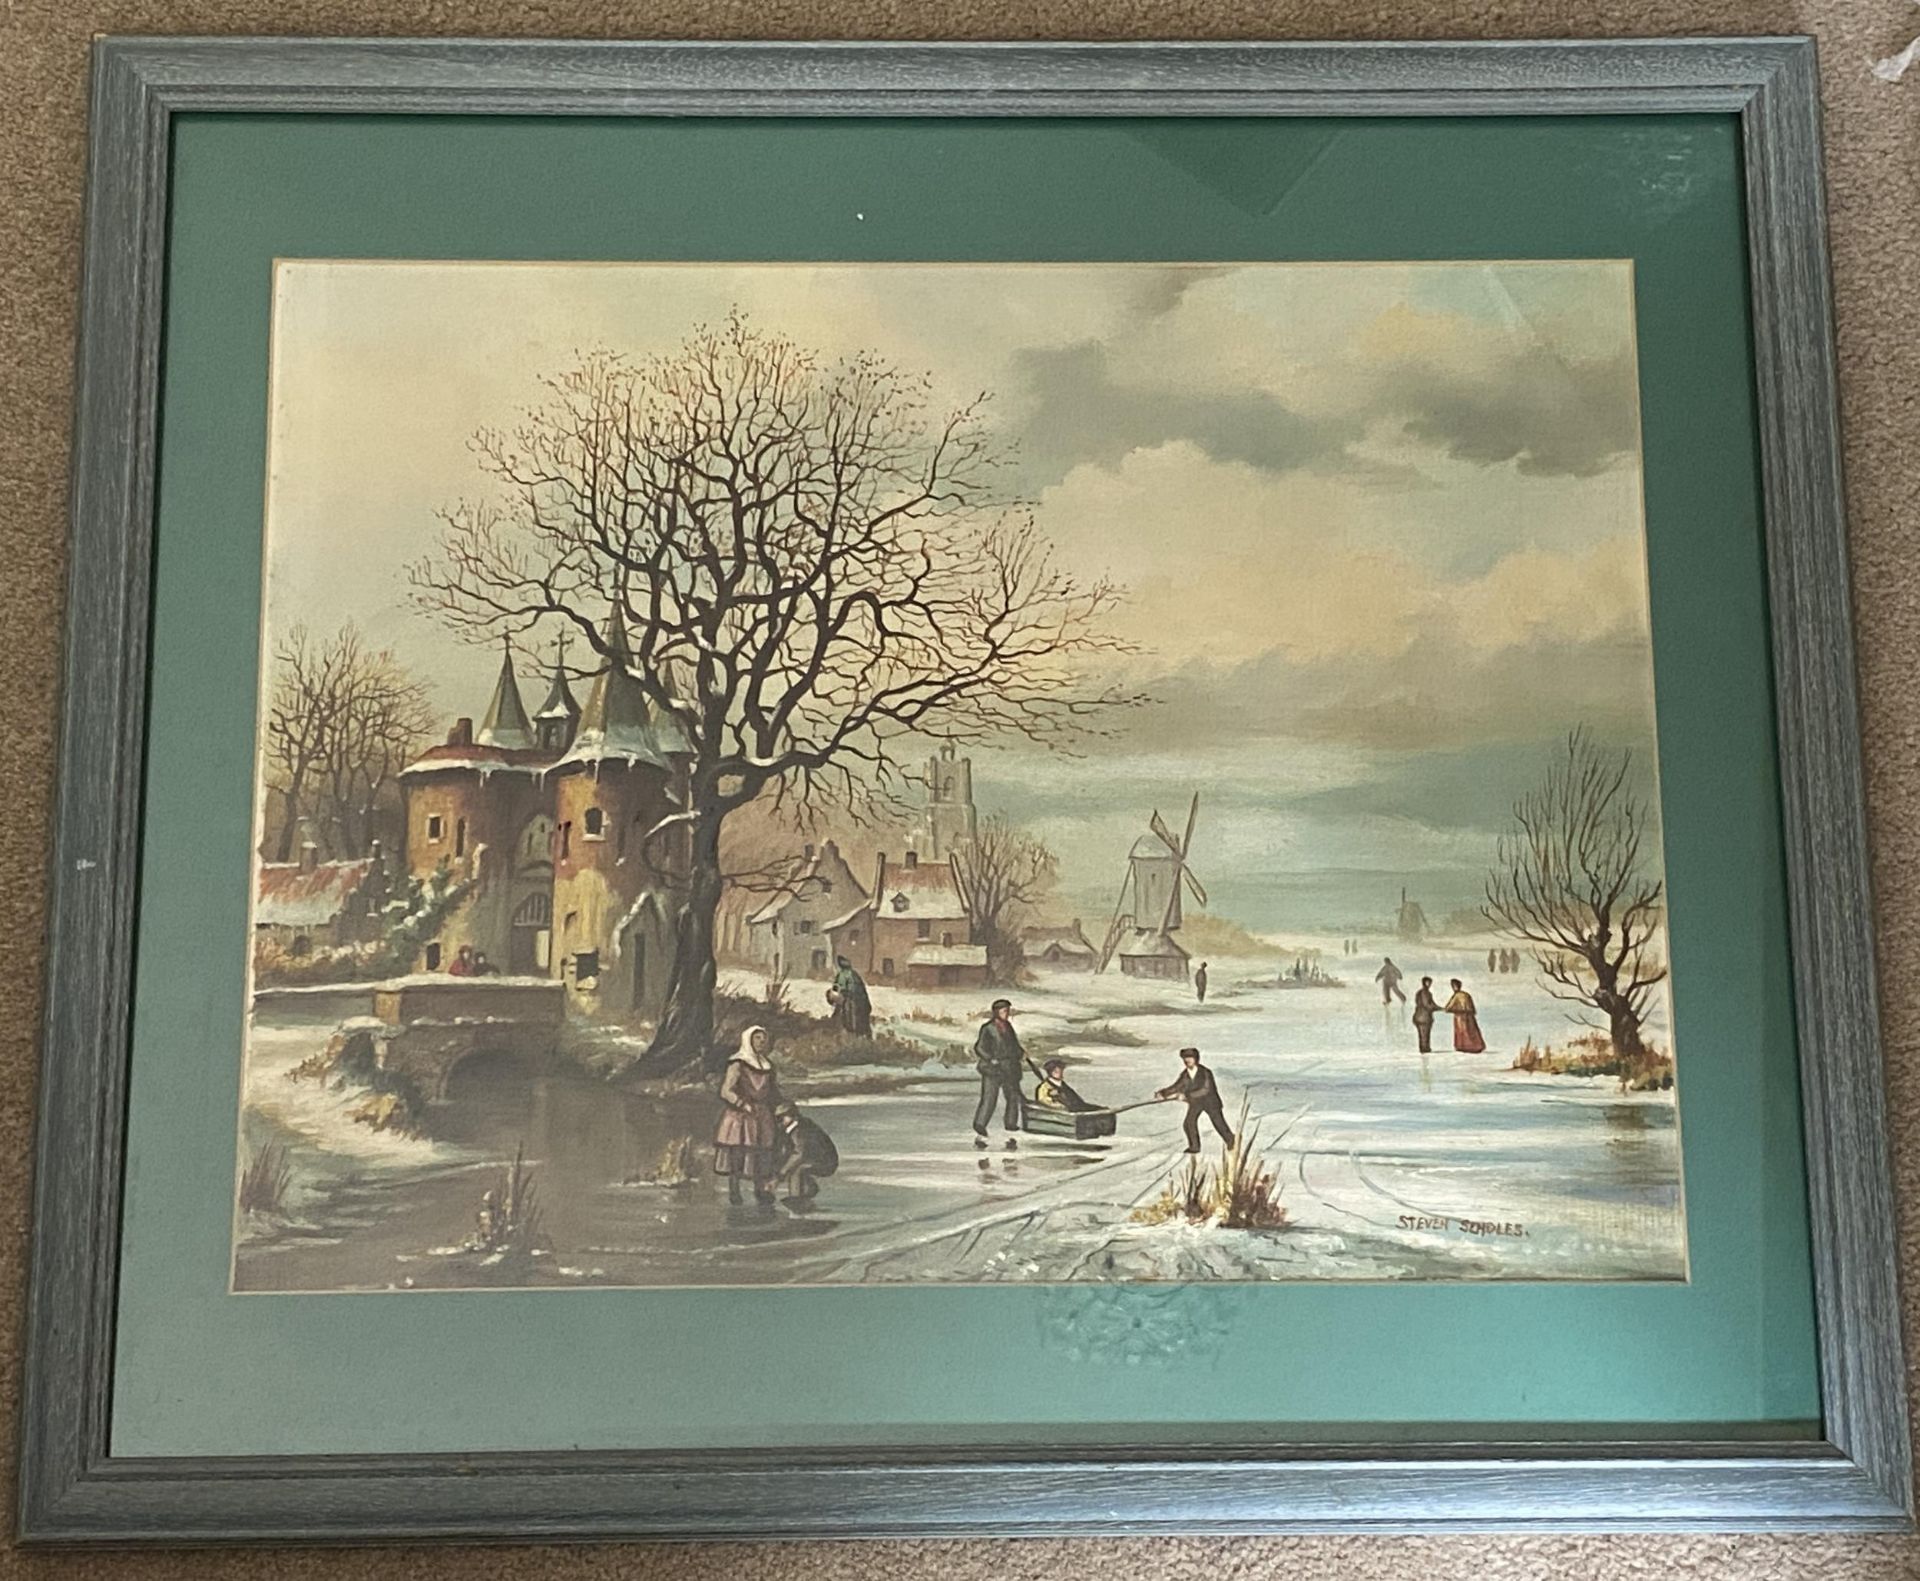 A STEVEN SCHOLES (BRITISH, B.1952) OIL PAINTING OF A WINTER SCENE, FRAMED, 55 X 65CM - Image 5 of 5